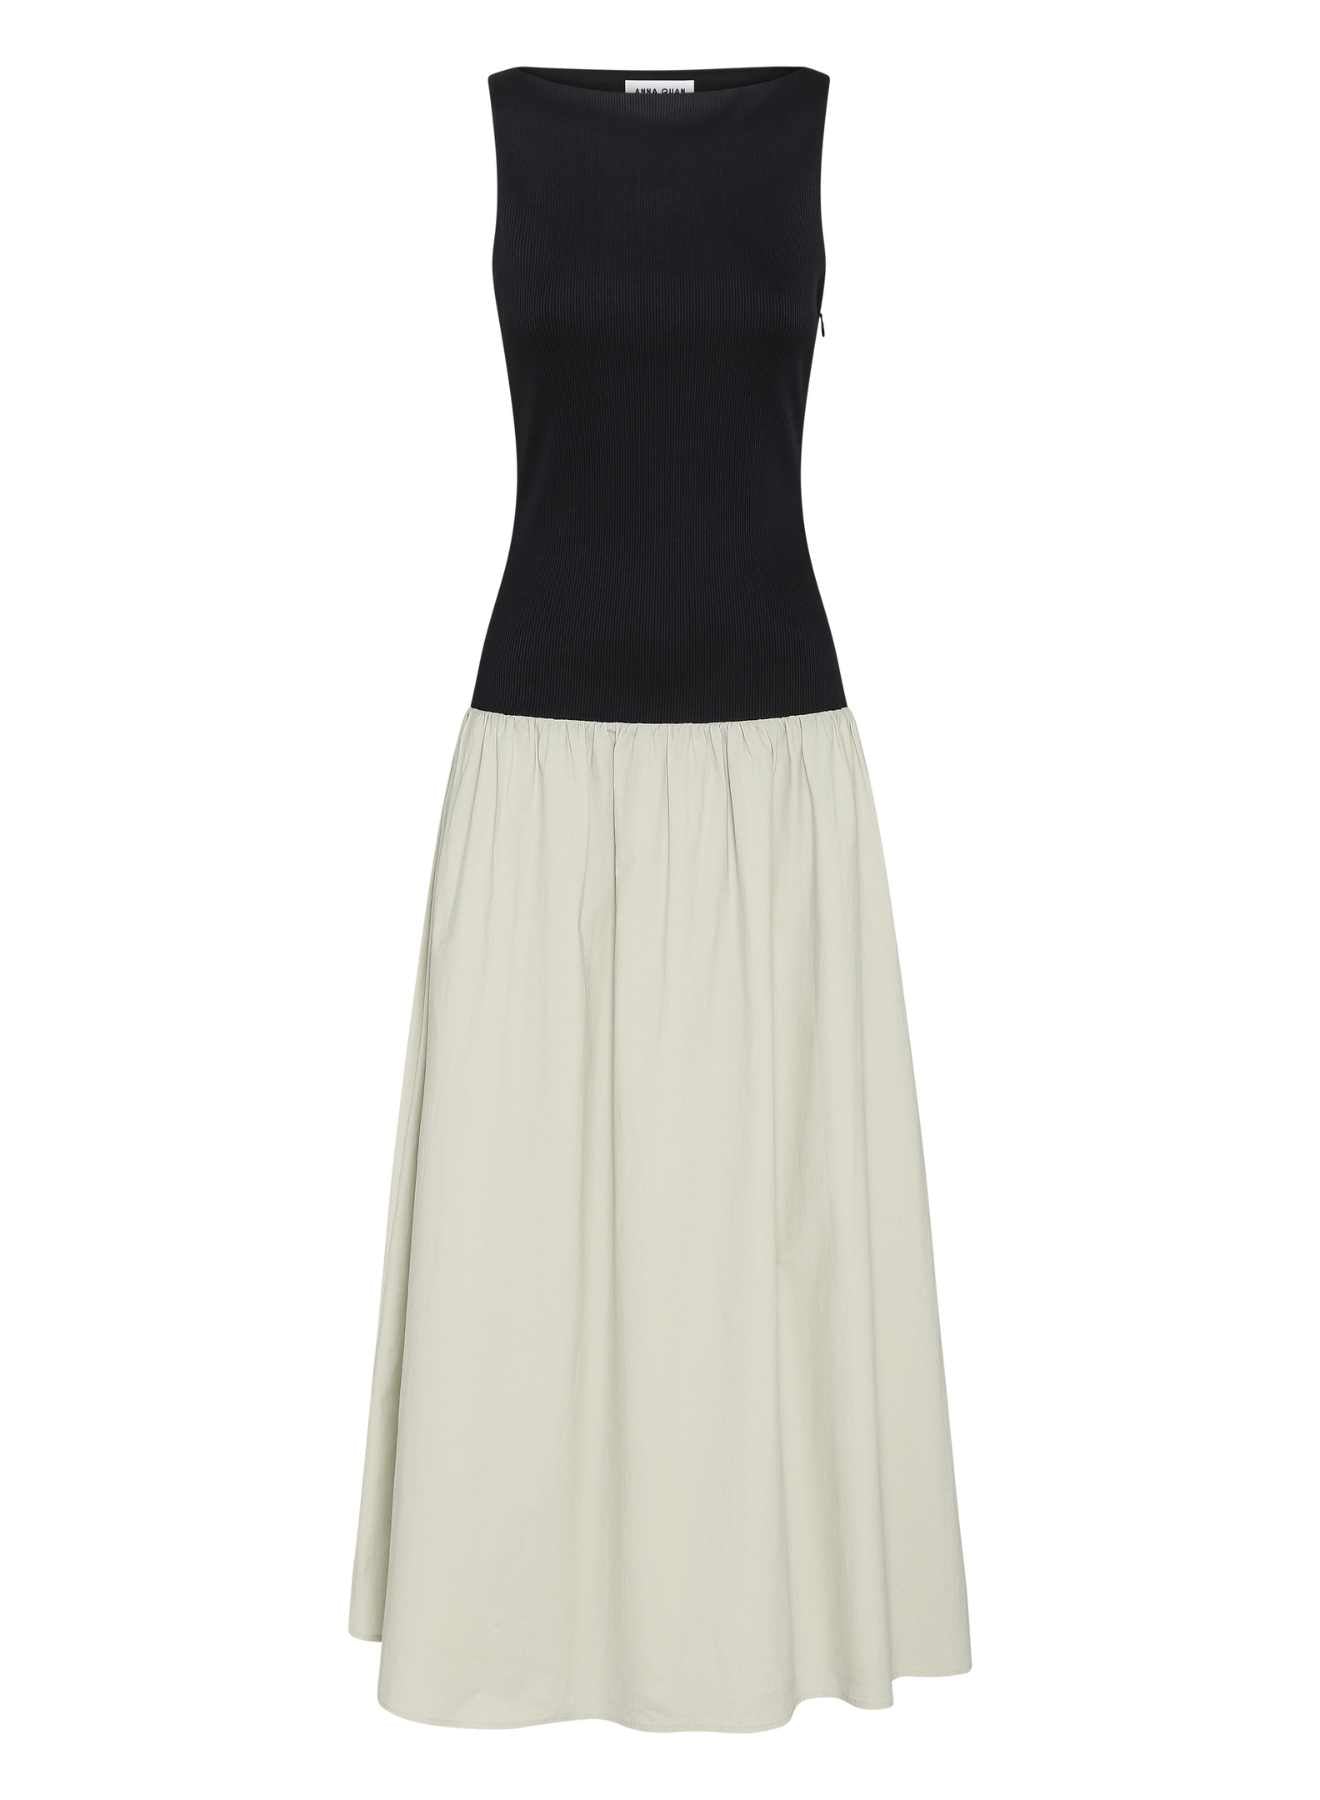 Dress up in style with ANNA QUAN'S Boat Neck Mixed Media Dress – a perfect blend of sophistication and comfort. The boat neck adds a touch of elegance to this versatile piece, ideal for a variety of occasions - easily taking you from day to dinner. Dinner dress, day dress, every day dress, mixed media dress, cotton skirt, stretch top.